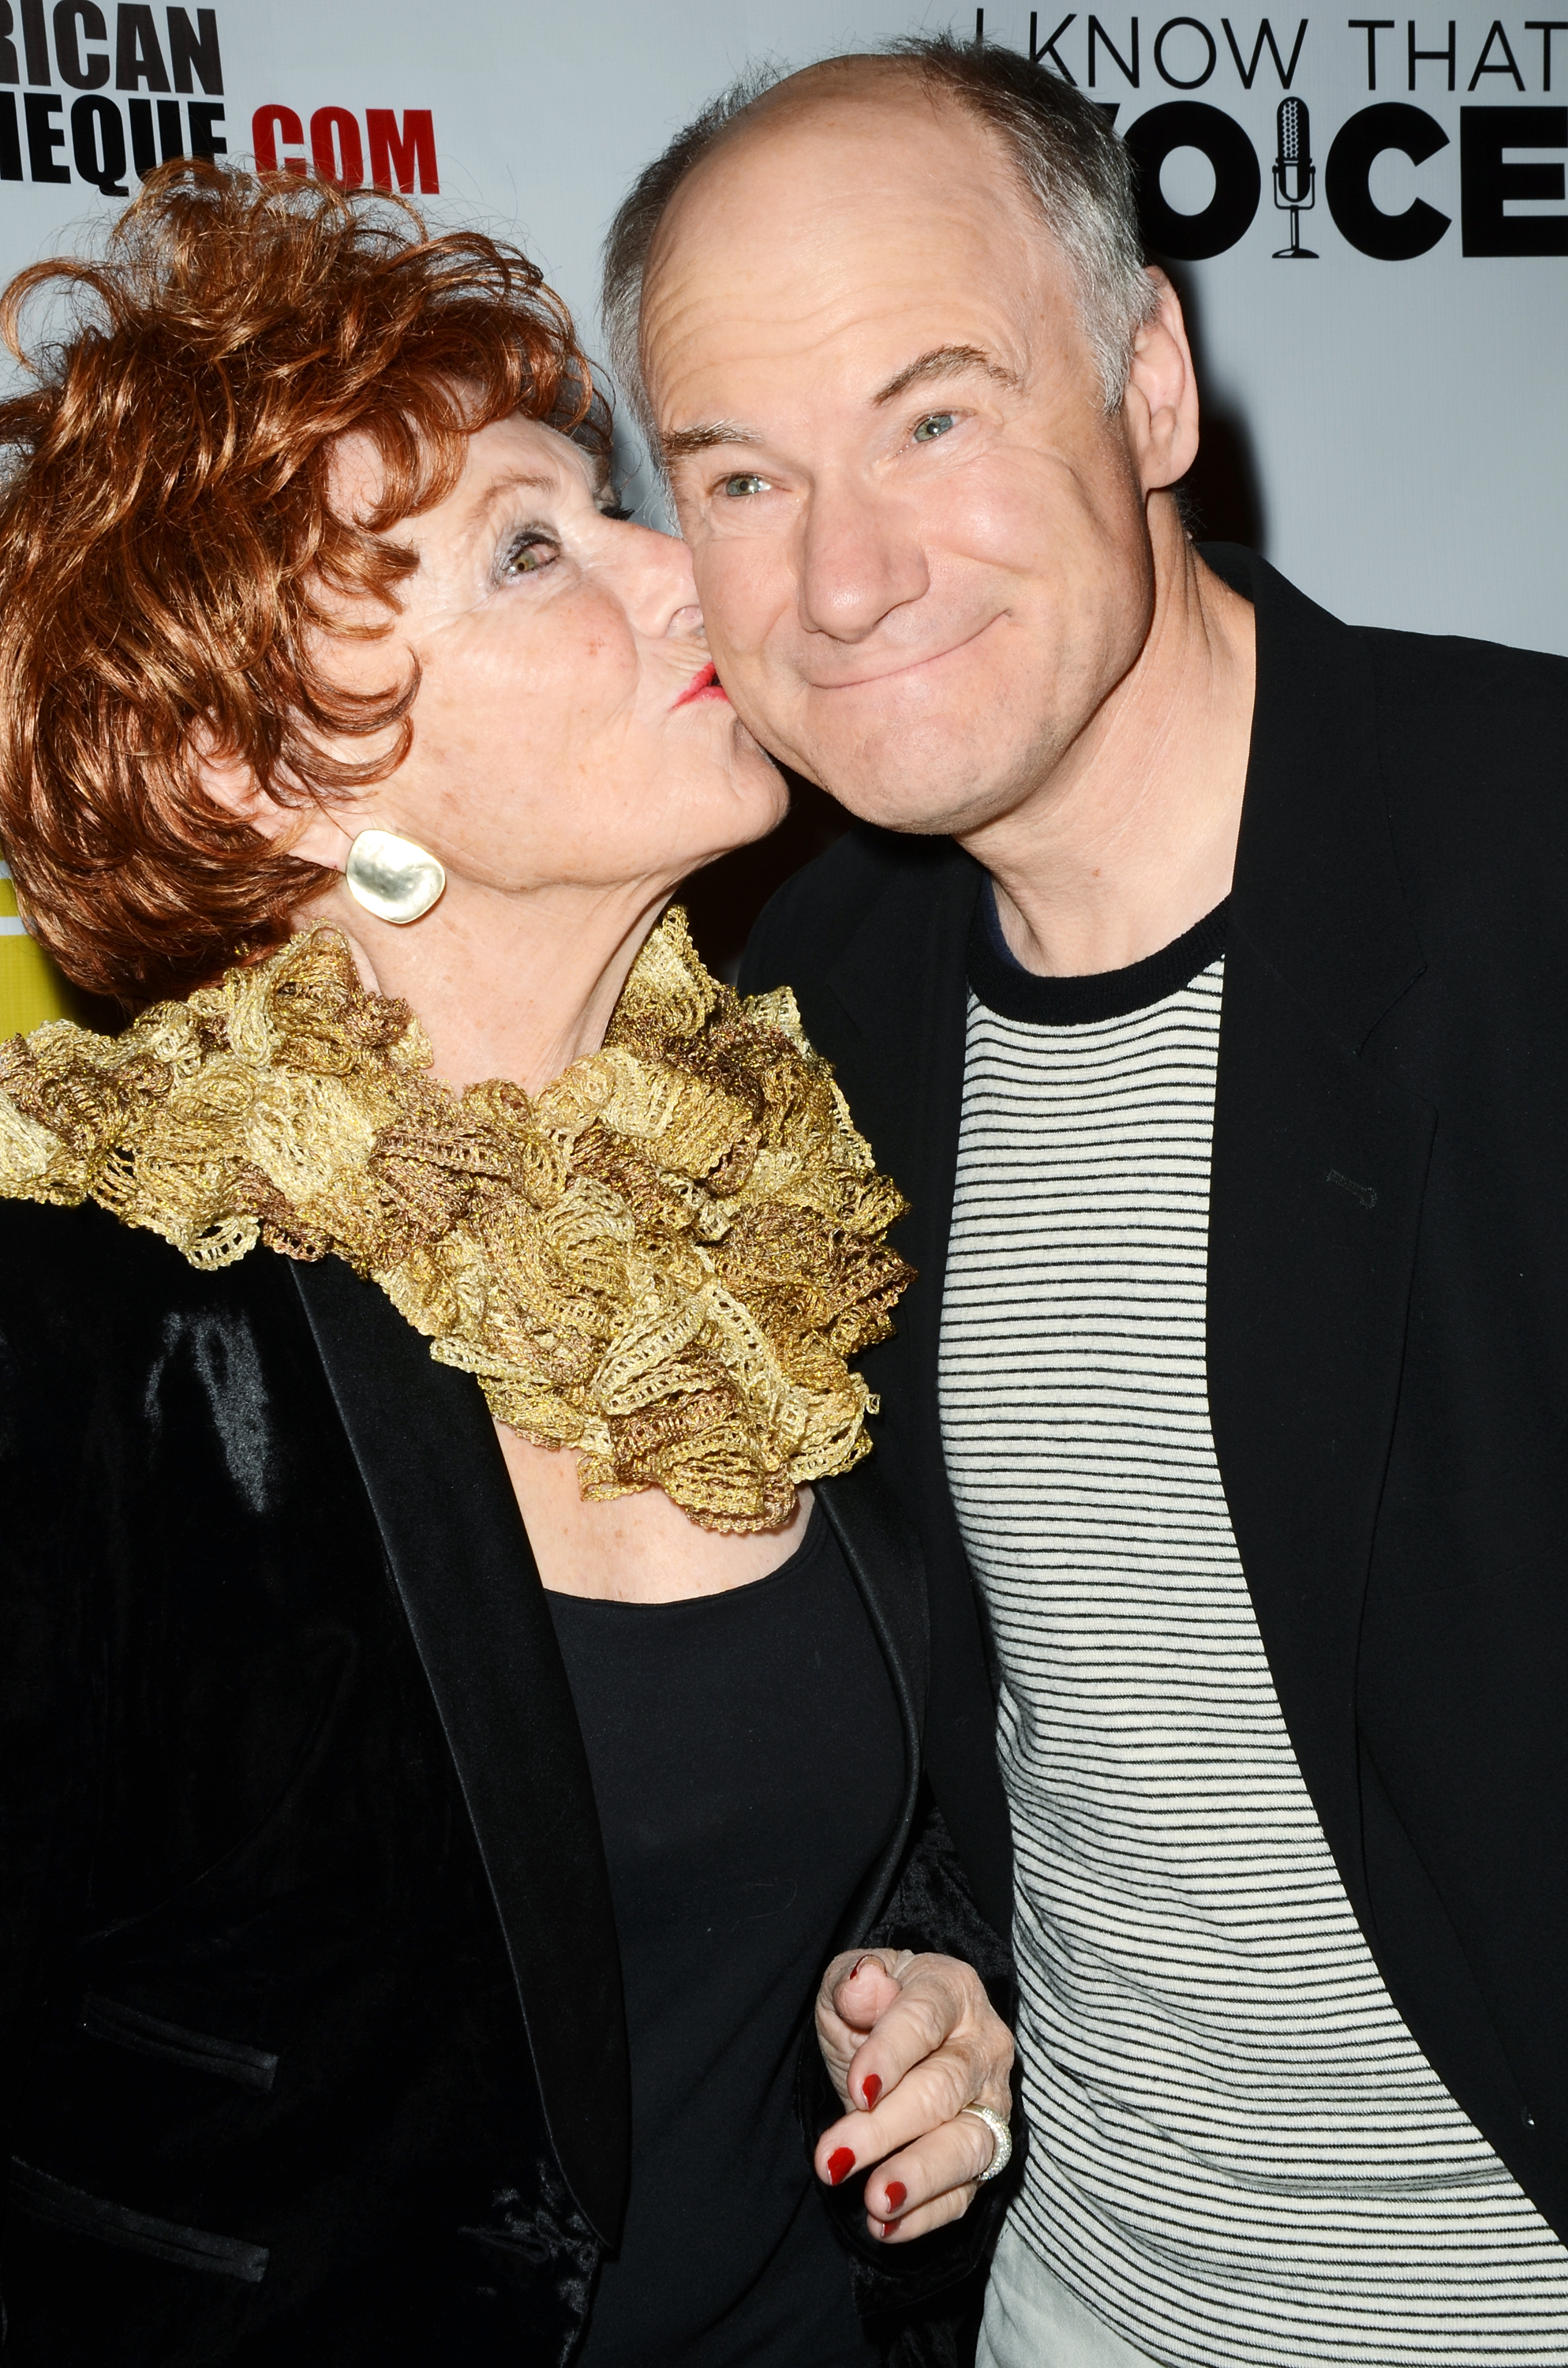 Marion Ross and her son Jim Meskimen at the Los Angeles premiere of "I Know That Voice" on November 6, 2013 in Hollywood, California | Source: Getty Images